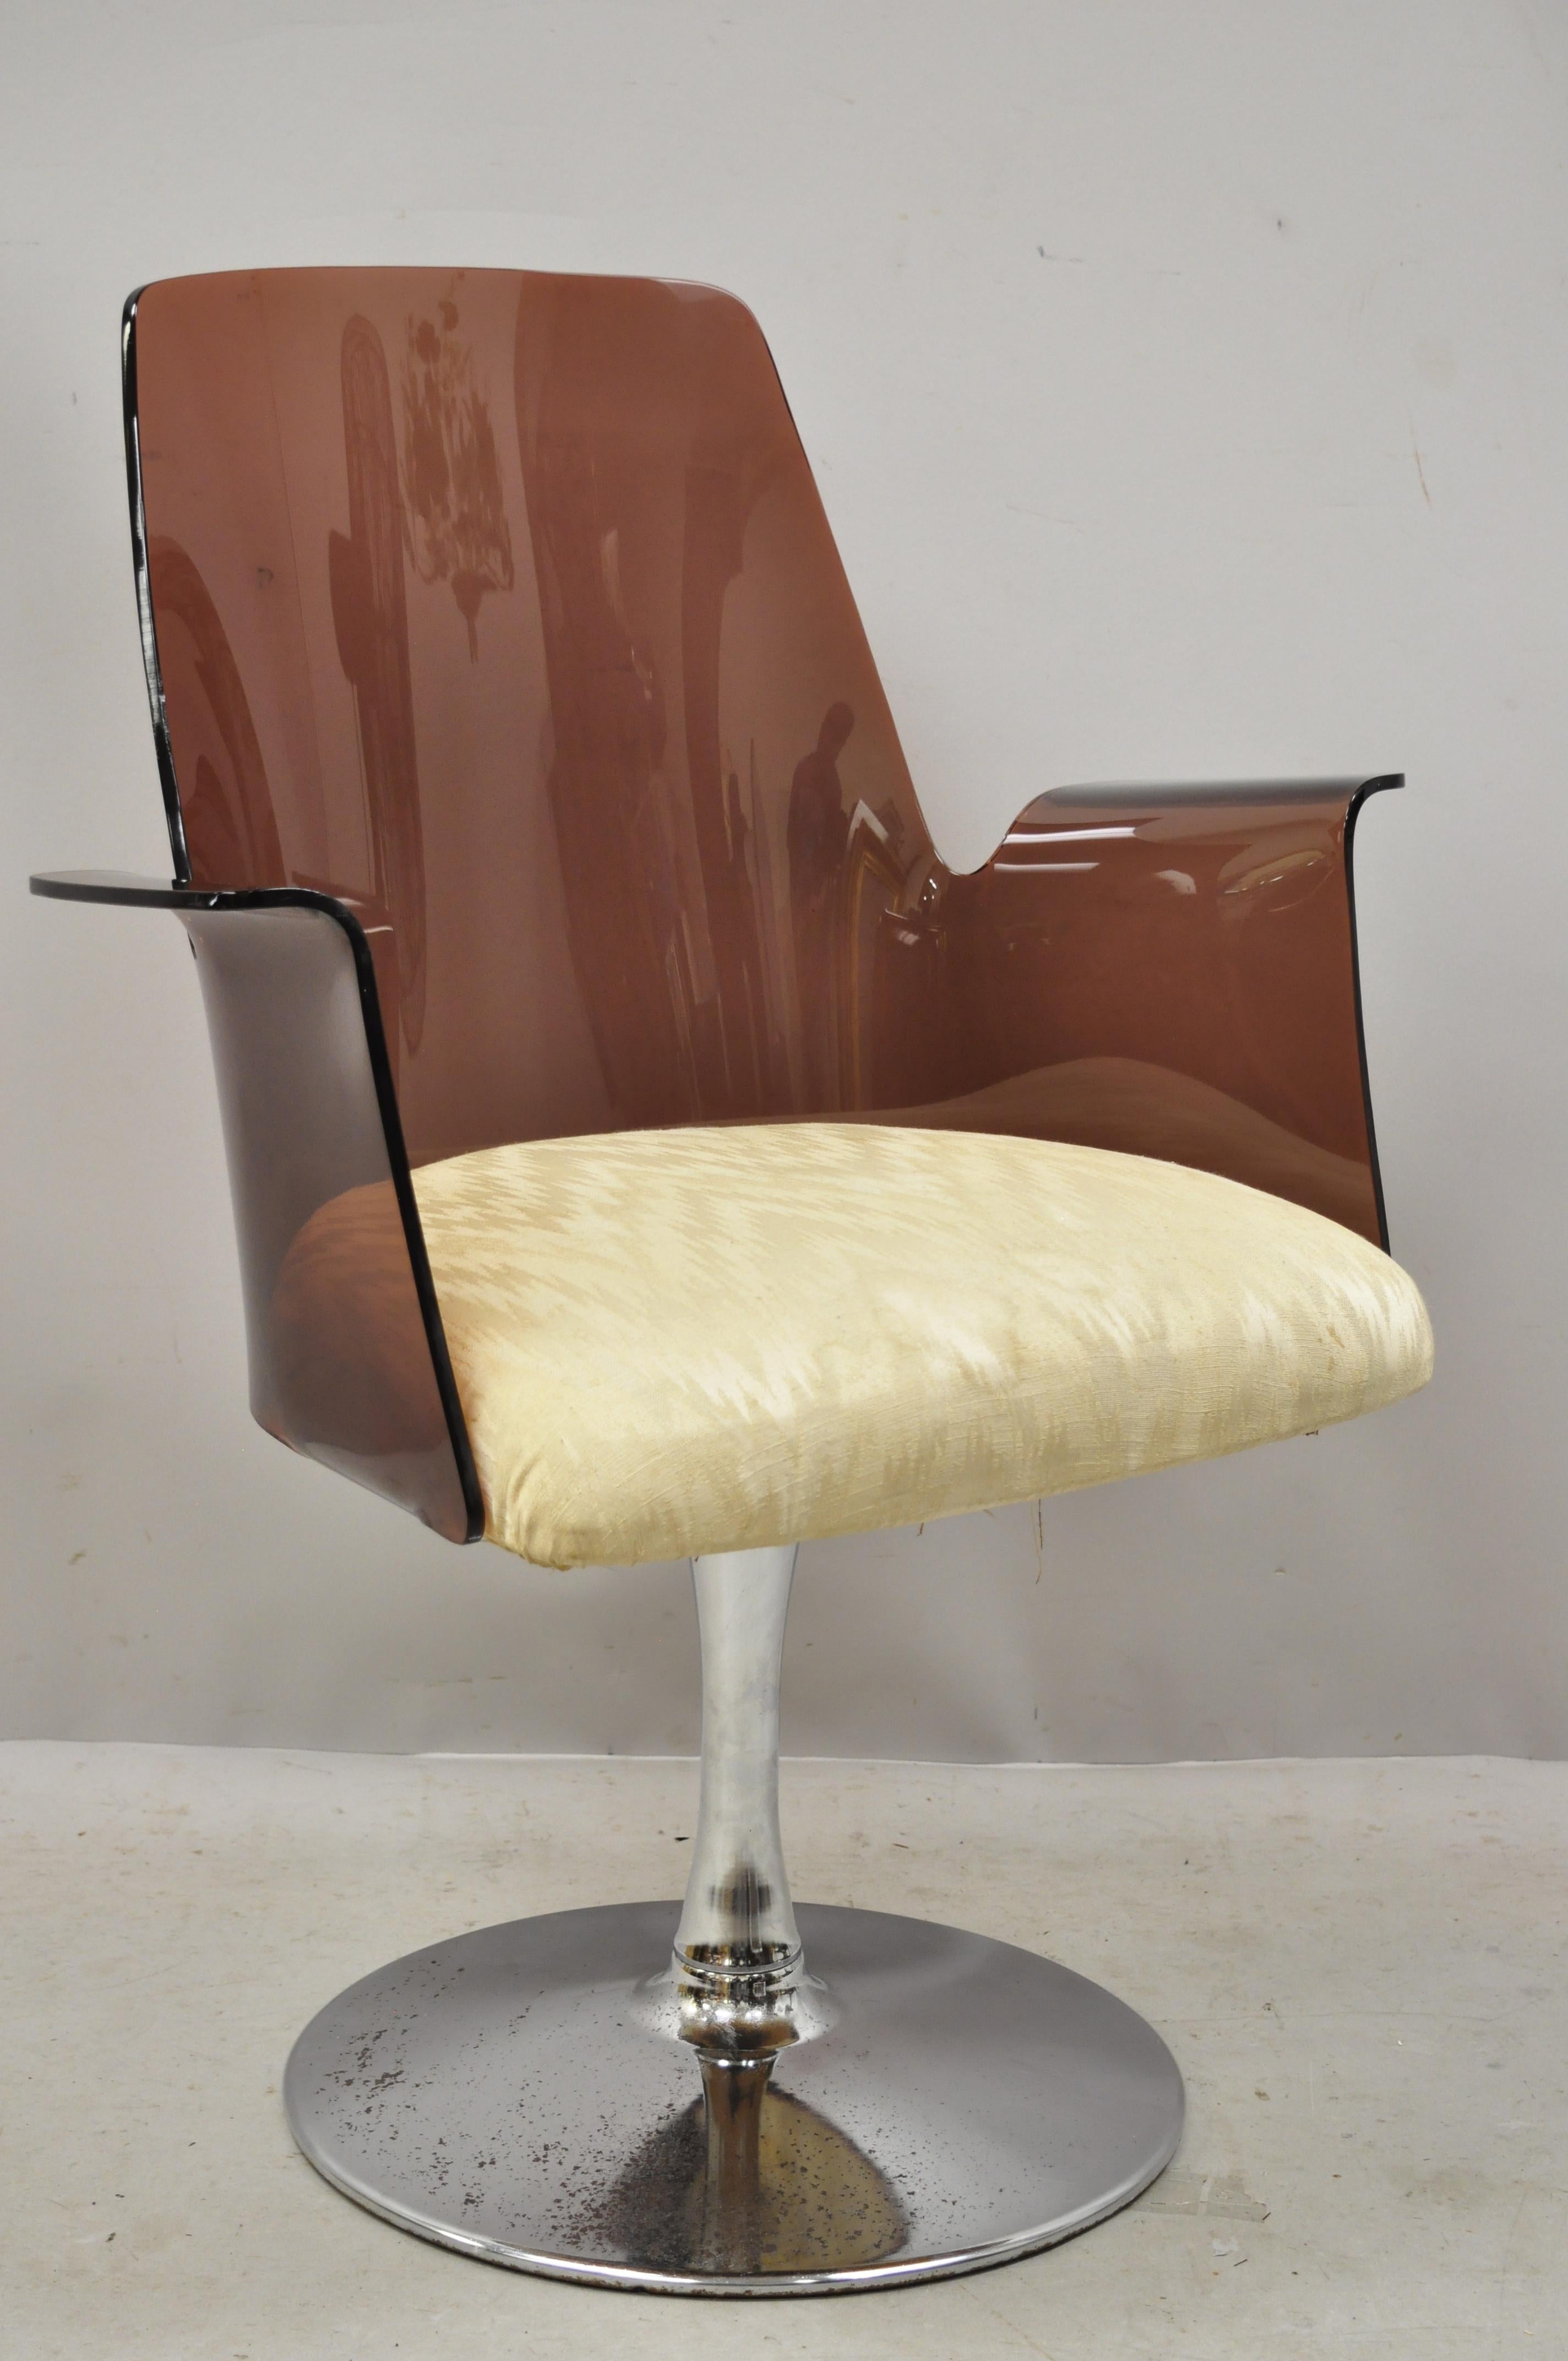 Vintage Laverne style curved cranberry Lucite tulip swivel base armchair (A). Item features a swivel seat, metal 